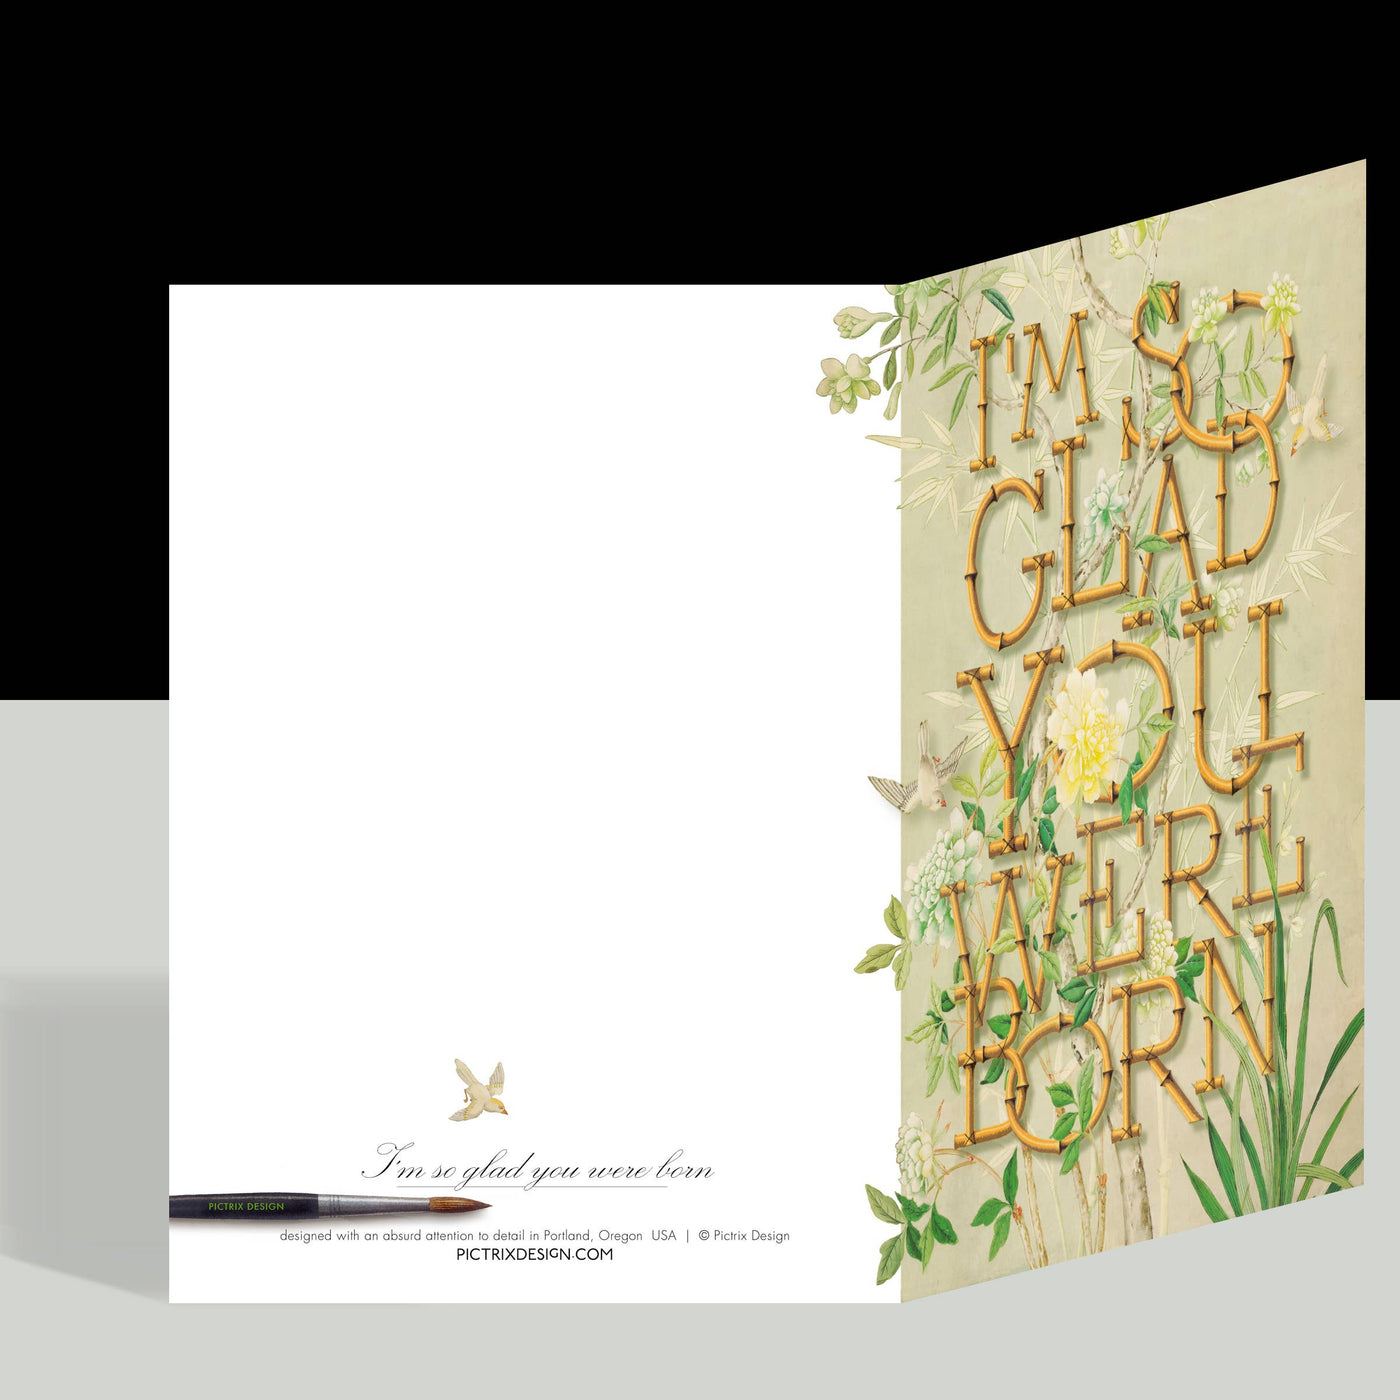 "I'm so glad you were born" A6 birthday card: Recycled white envelope